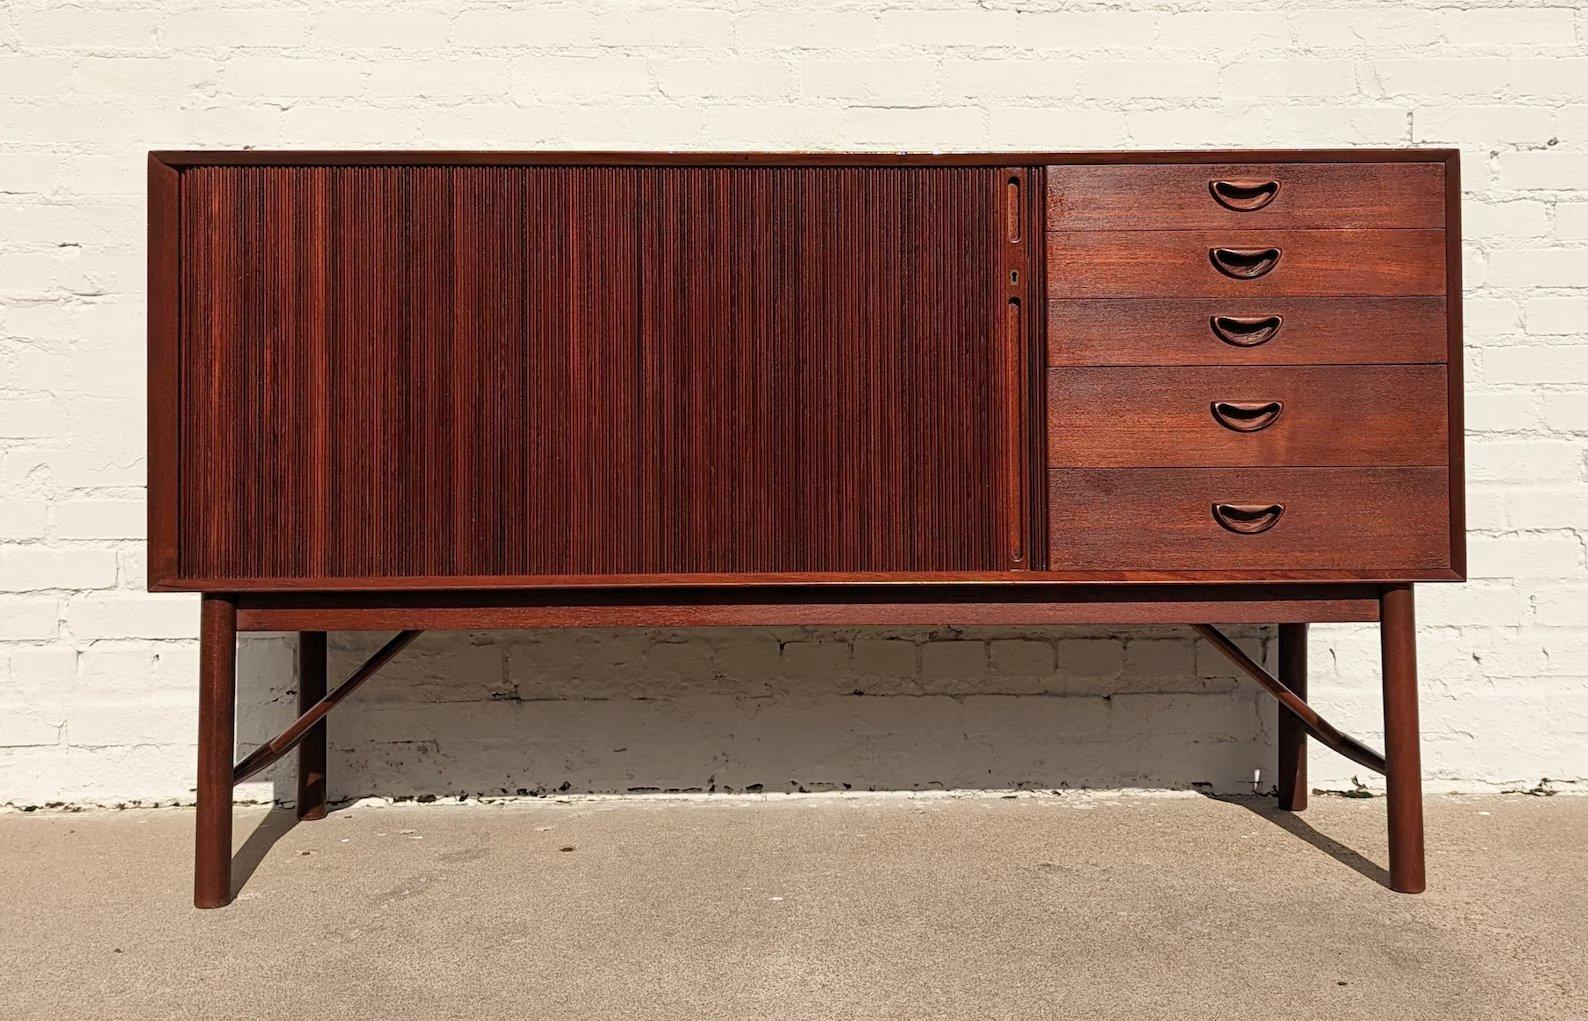 Mid Century Danish Modern Hvidt & Molgaard Tambour Door Teak Cabinet

Above average vintage condition and structurally sound. Has some expected slight finish wear and scratching. Back right edge has a 2